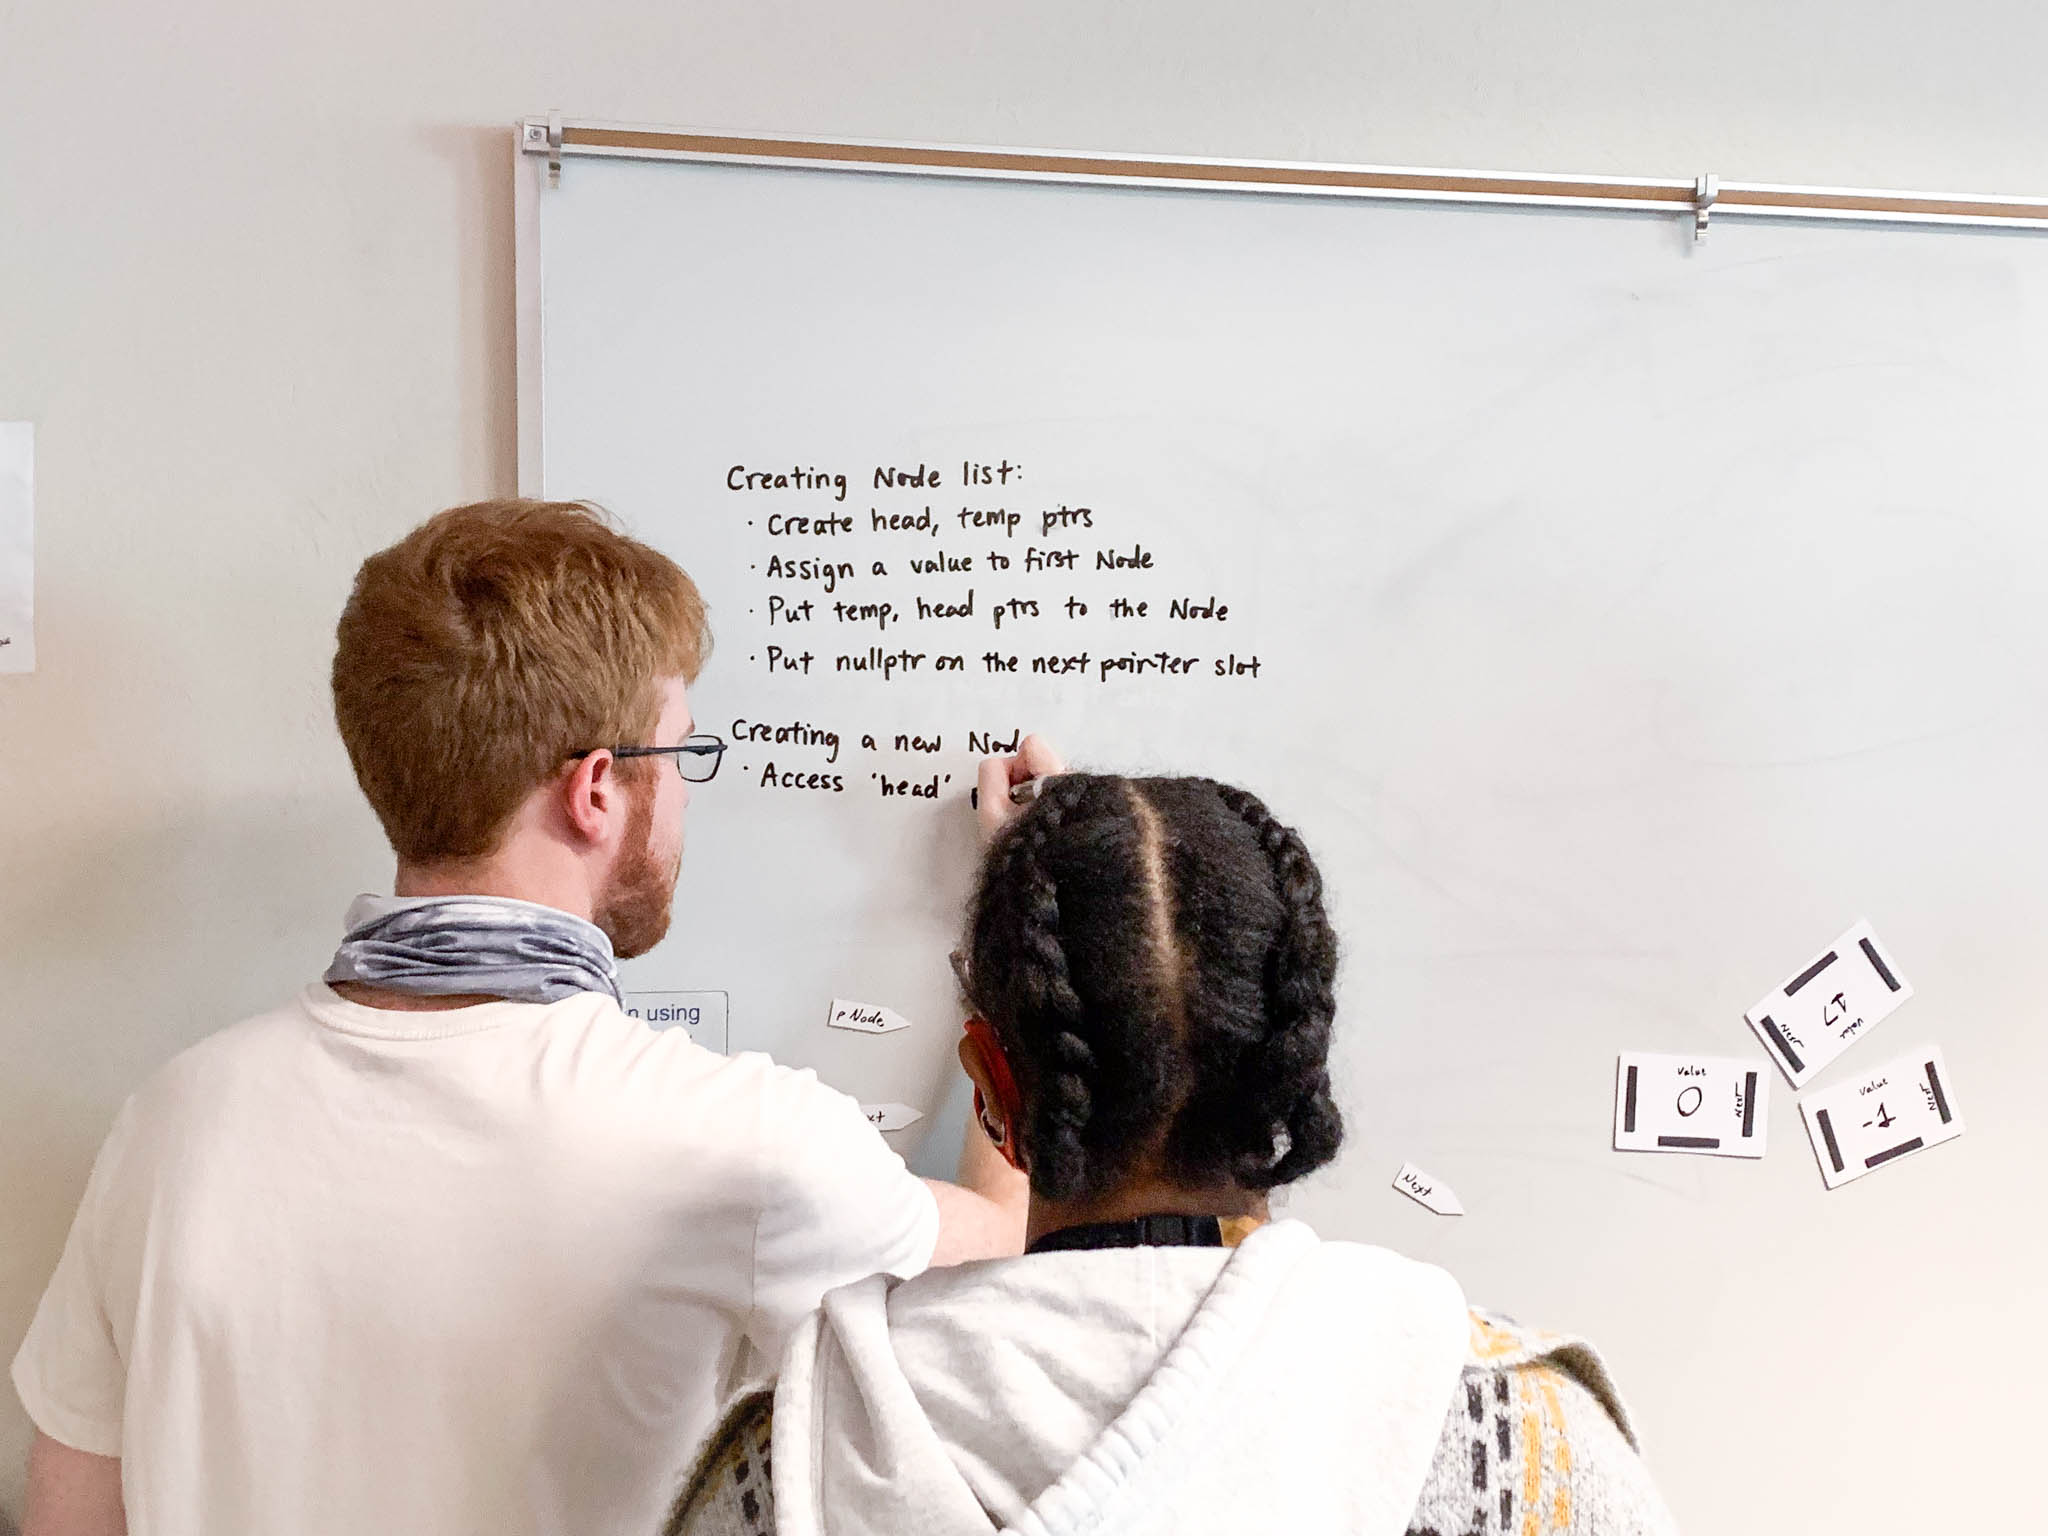 Two students work on a problem on a whiteboard